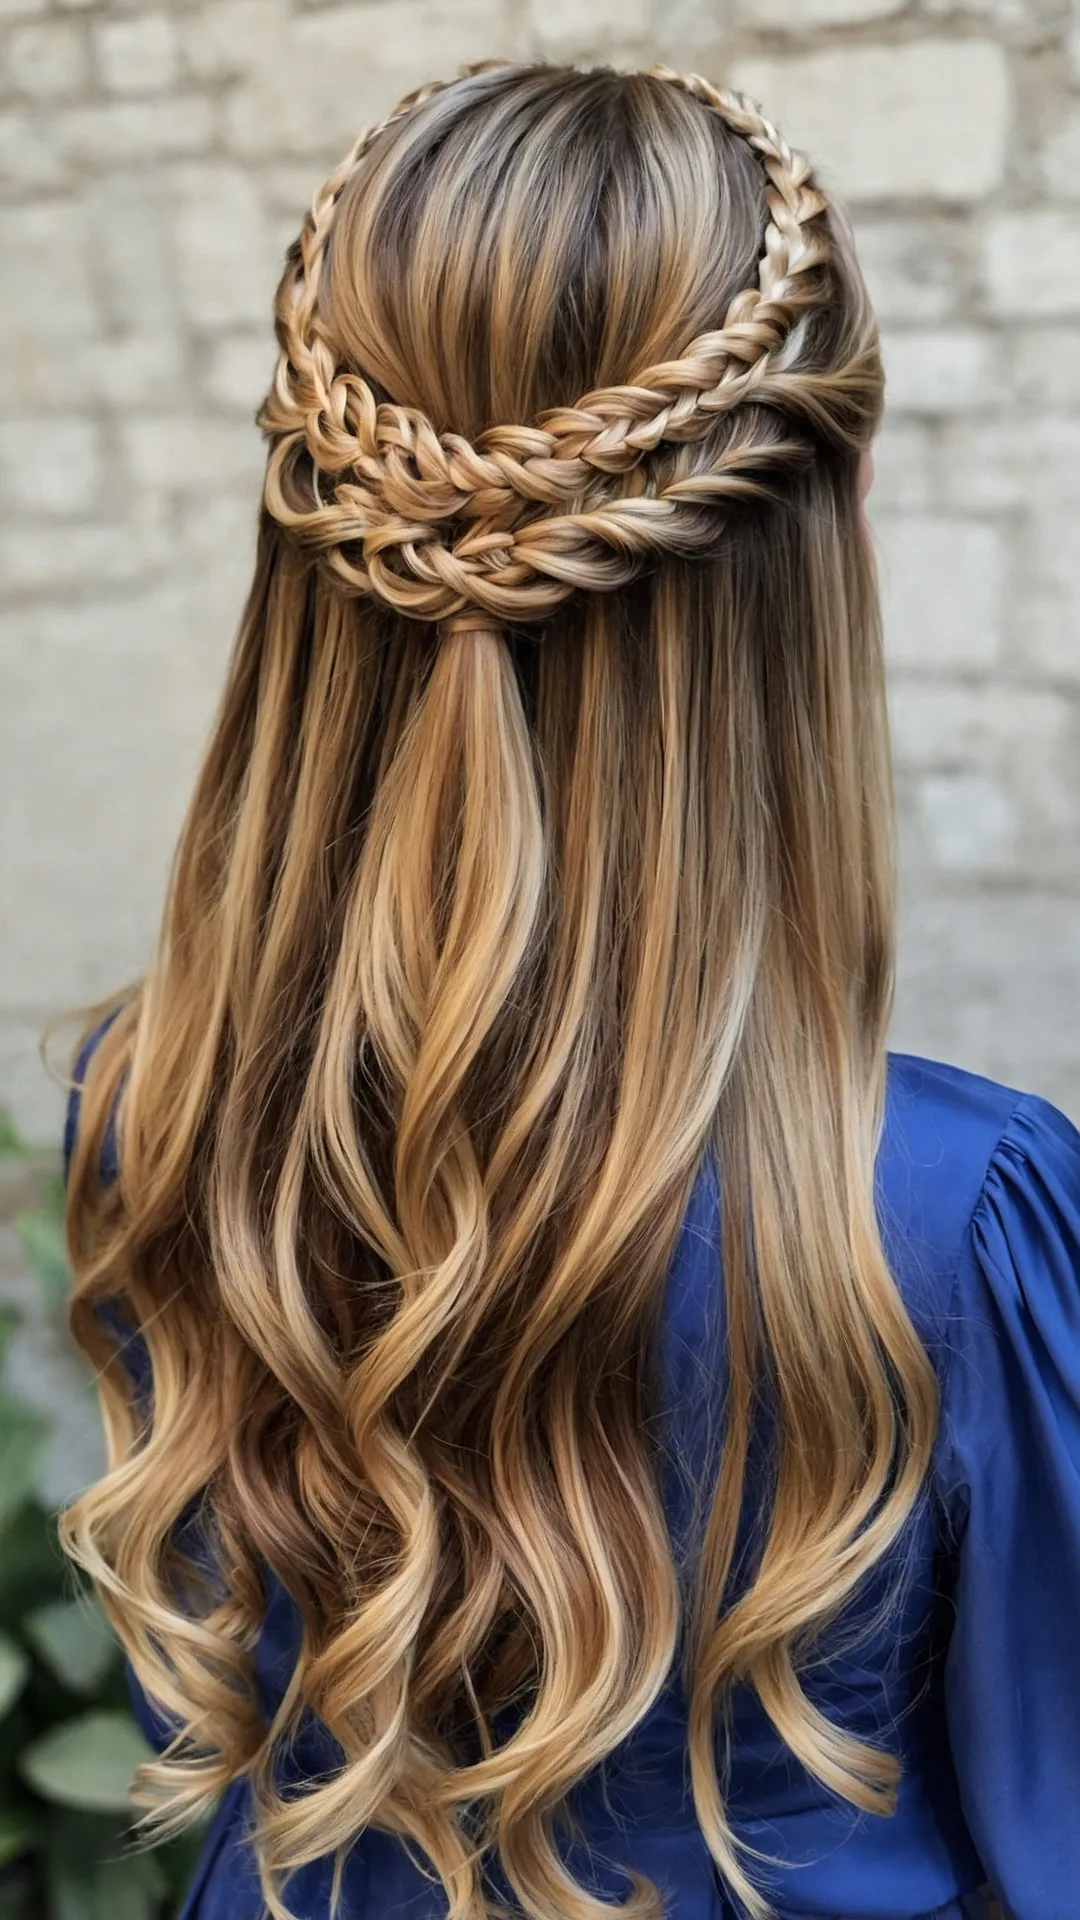 Celestial Curls: Long Hair Prom Hairstyle Trends